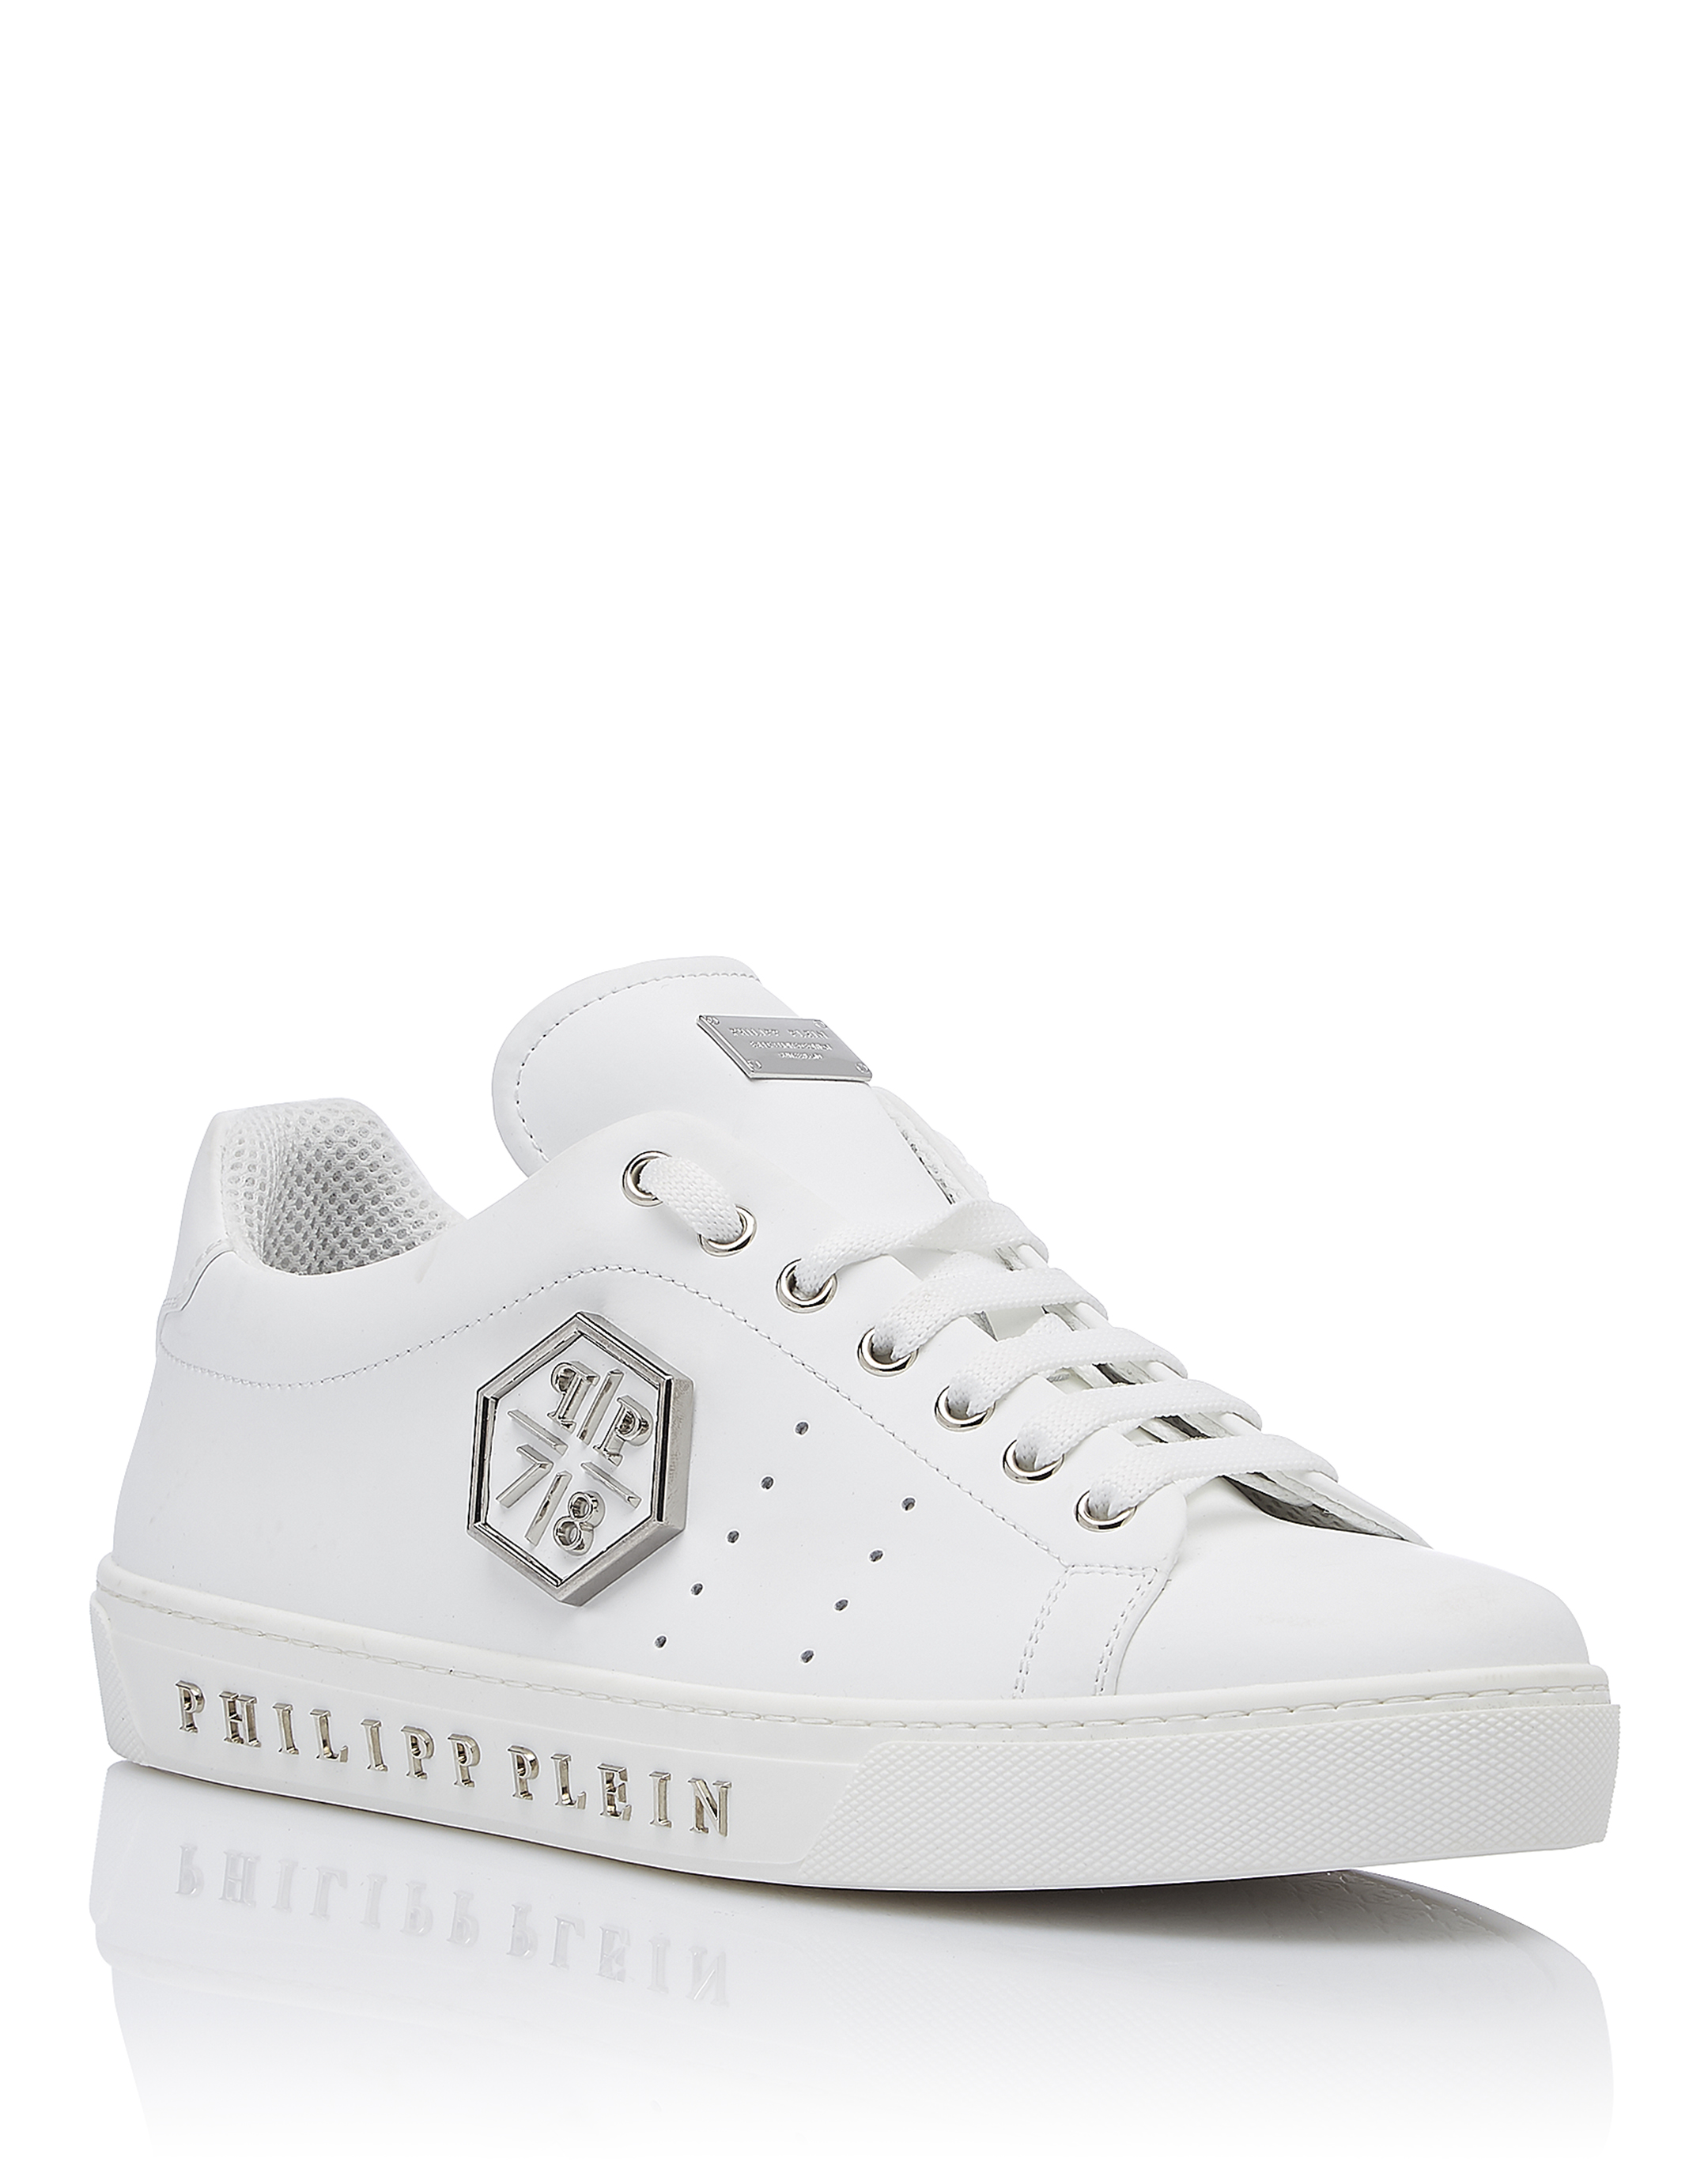 Lo-Top Sneakers "Basic power" | Philipp Plein Outlet